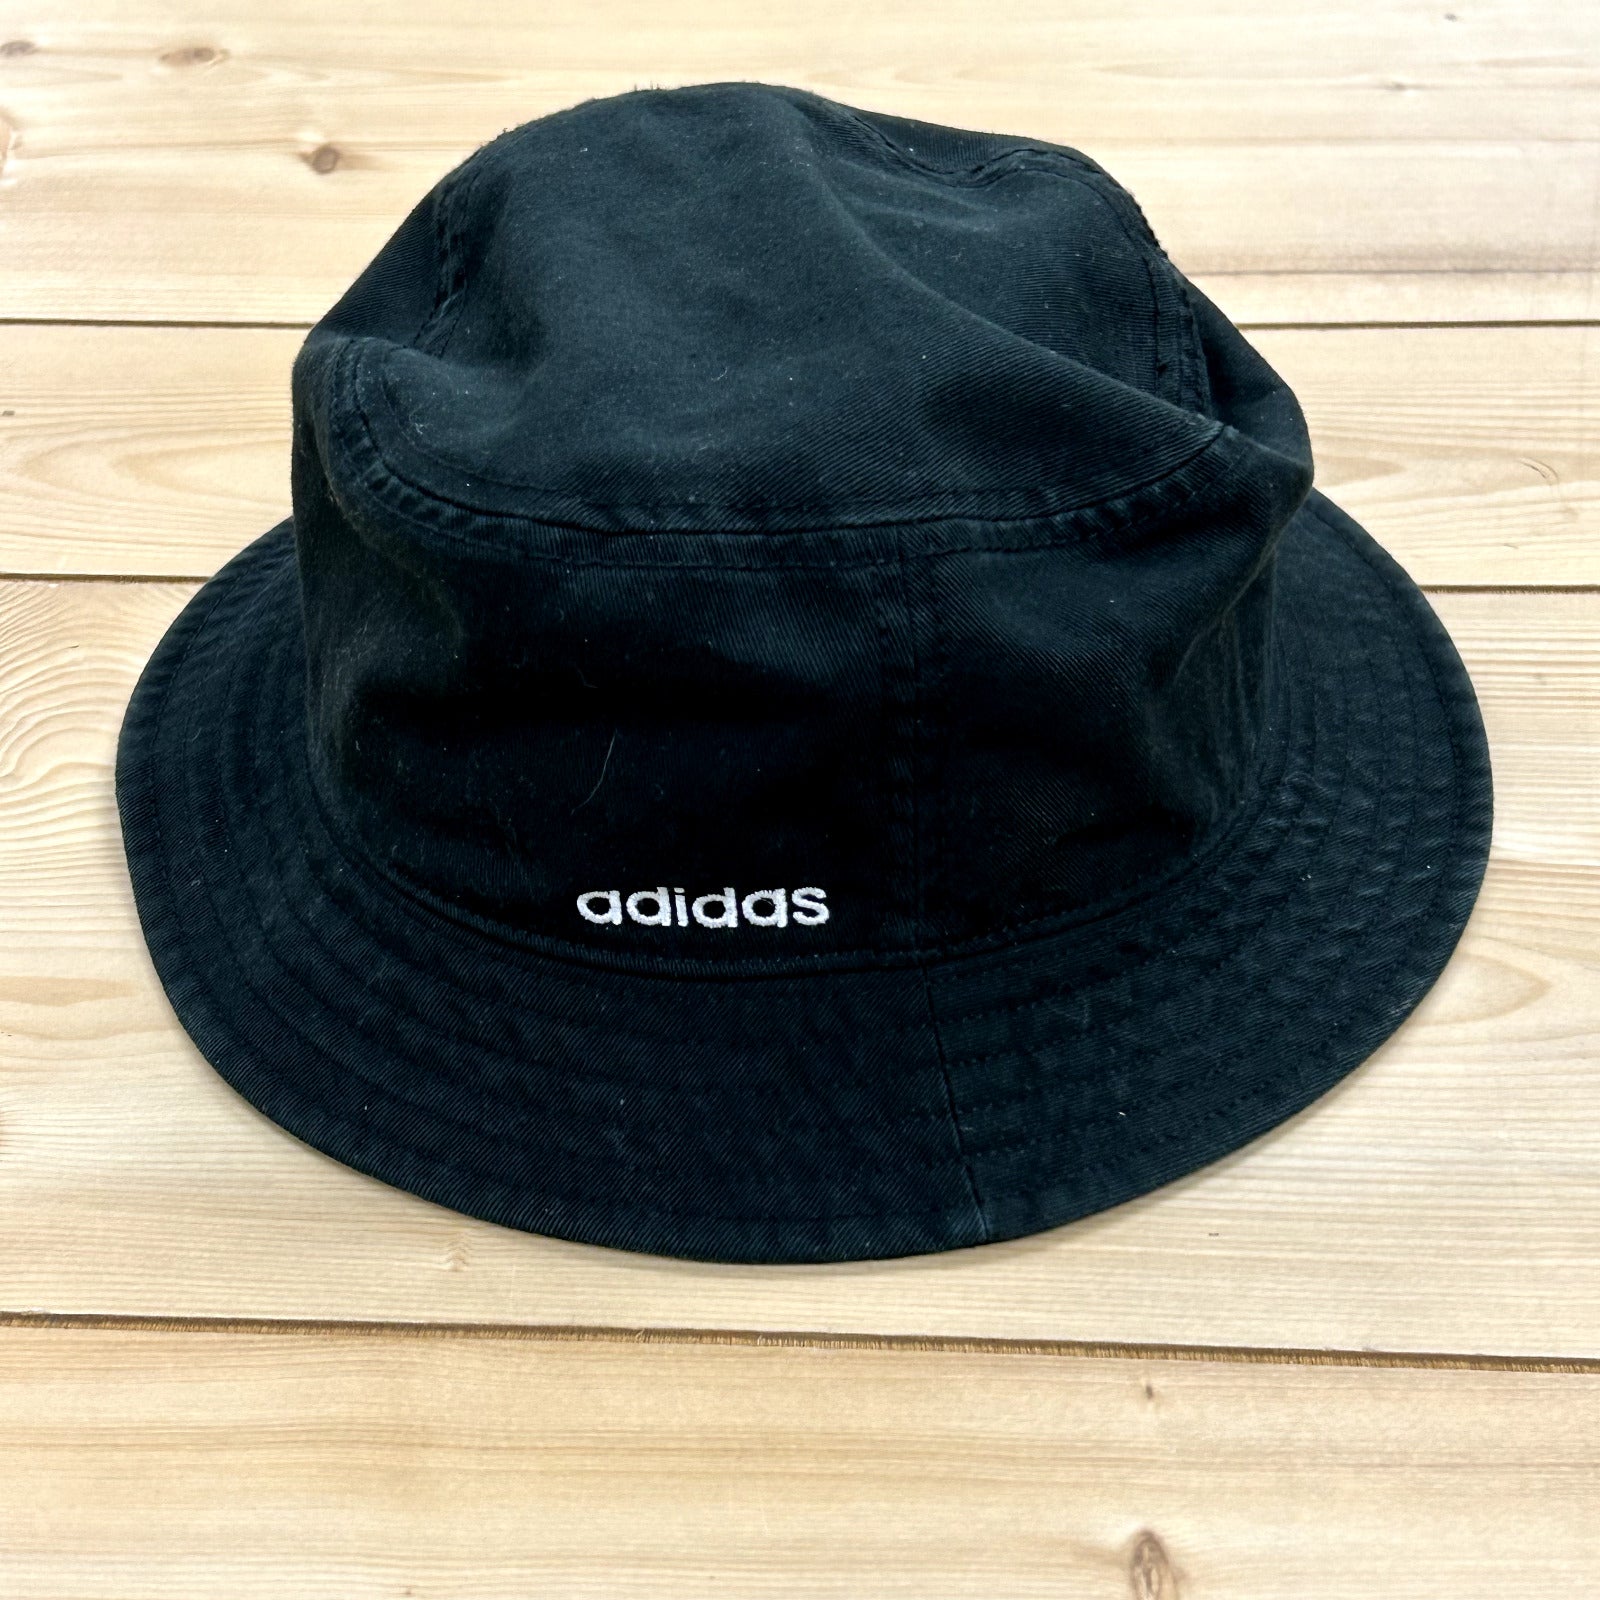 Adidas Black Essential Bucket Hat Summer Womens One Size Fits Most 144063C